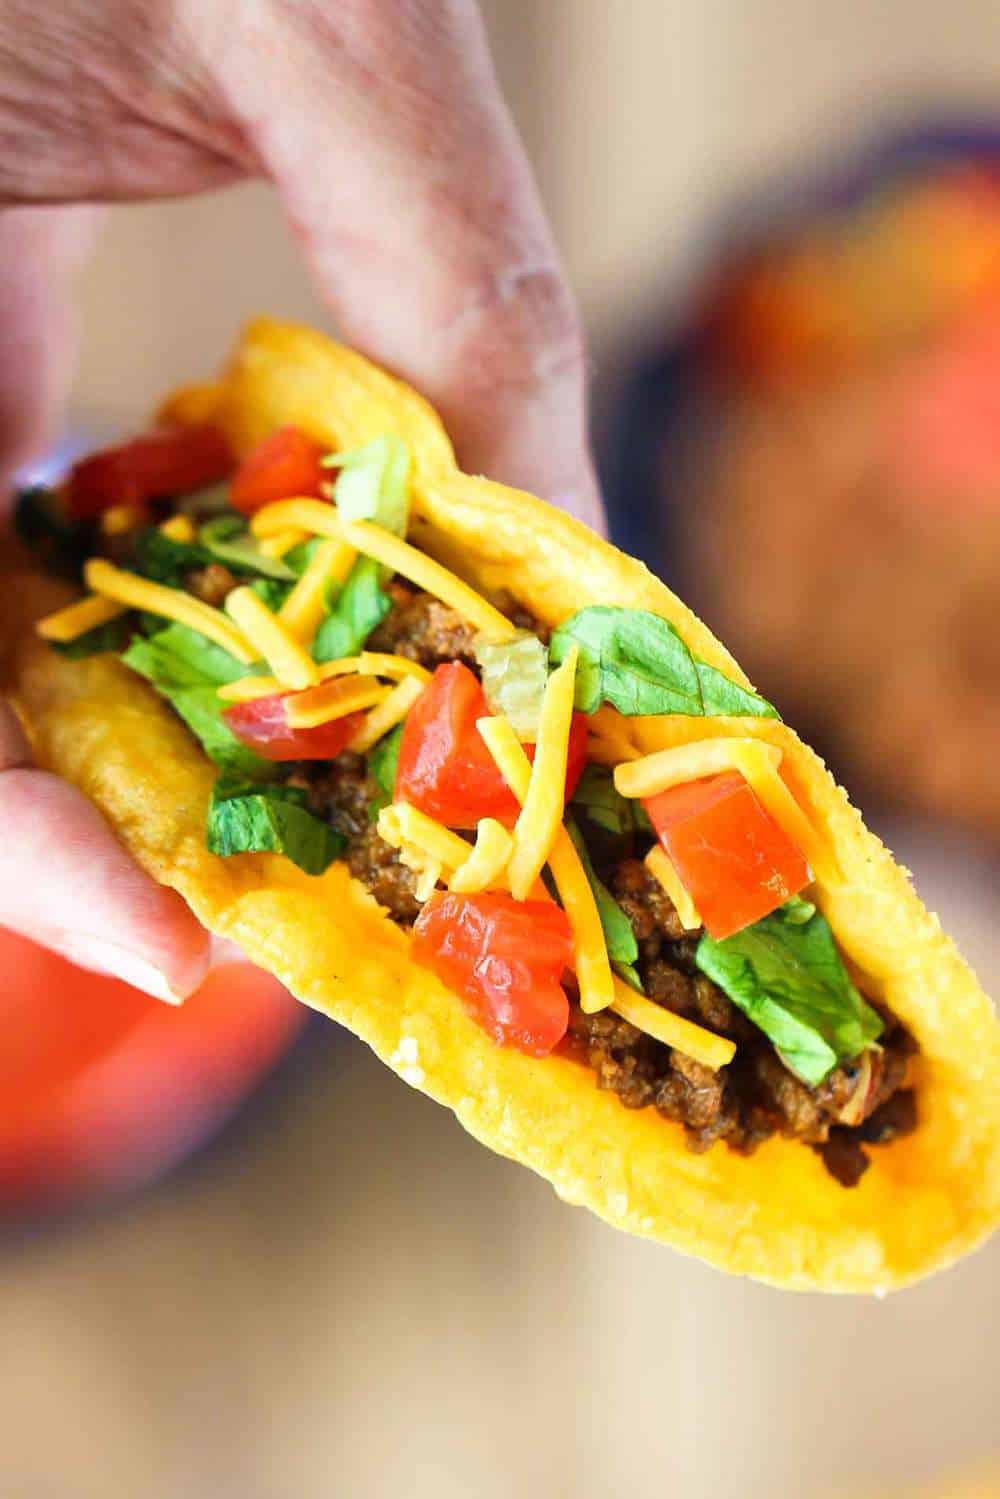 BEST-EVER HOMEMADE TEXMEX BEEF TACOS | How To Feed a Loon